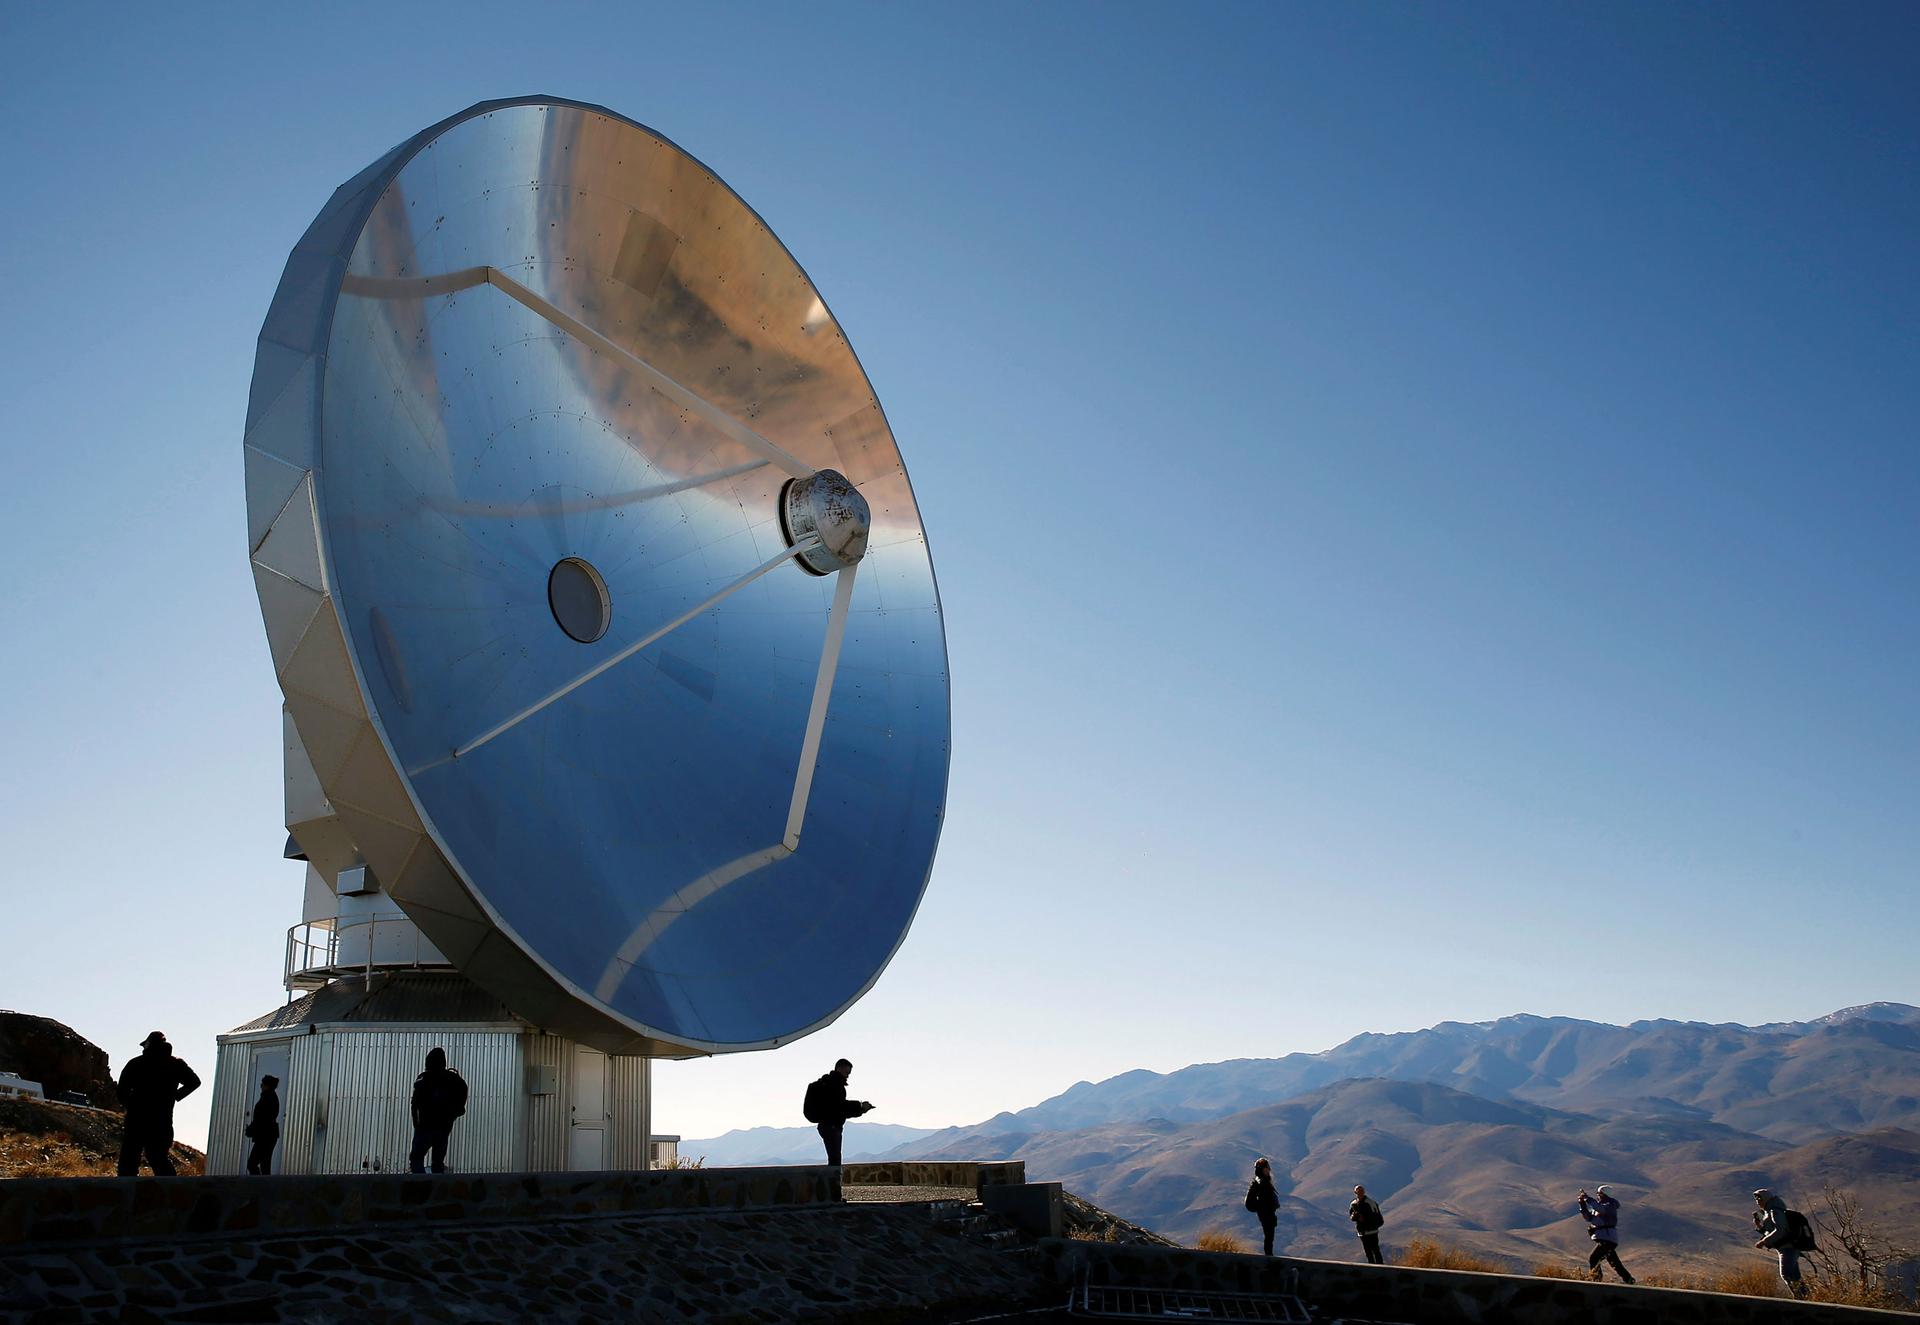 A large telescope is shown shining in the sun with people underneath.